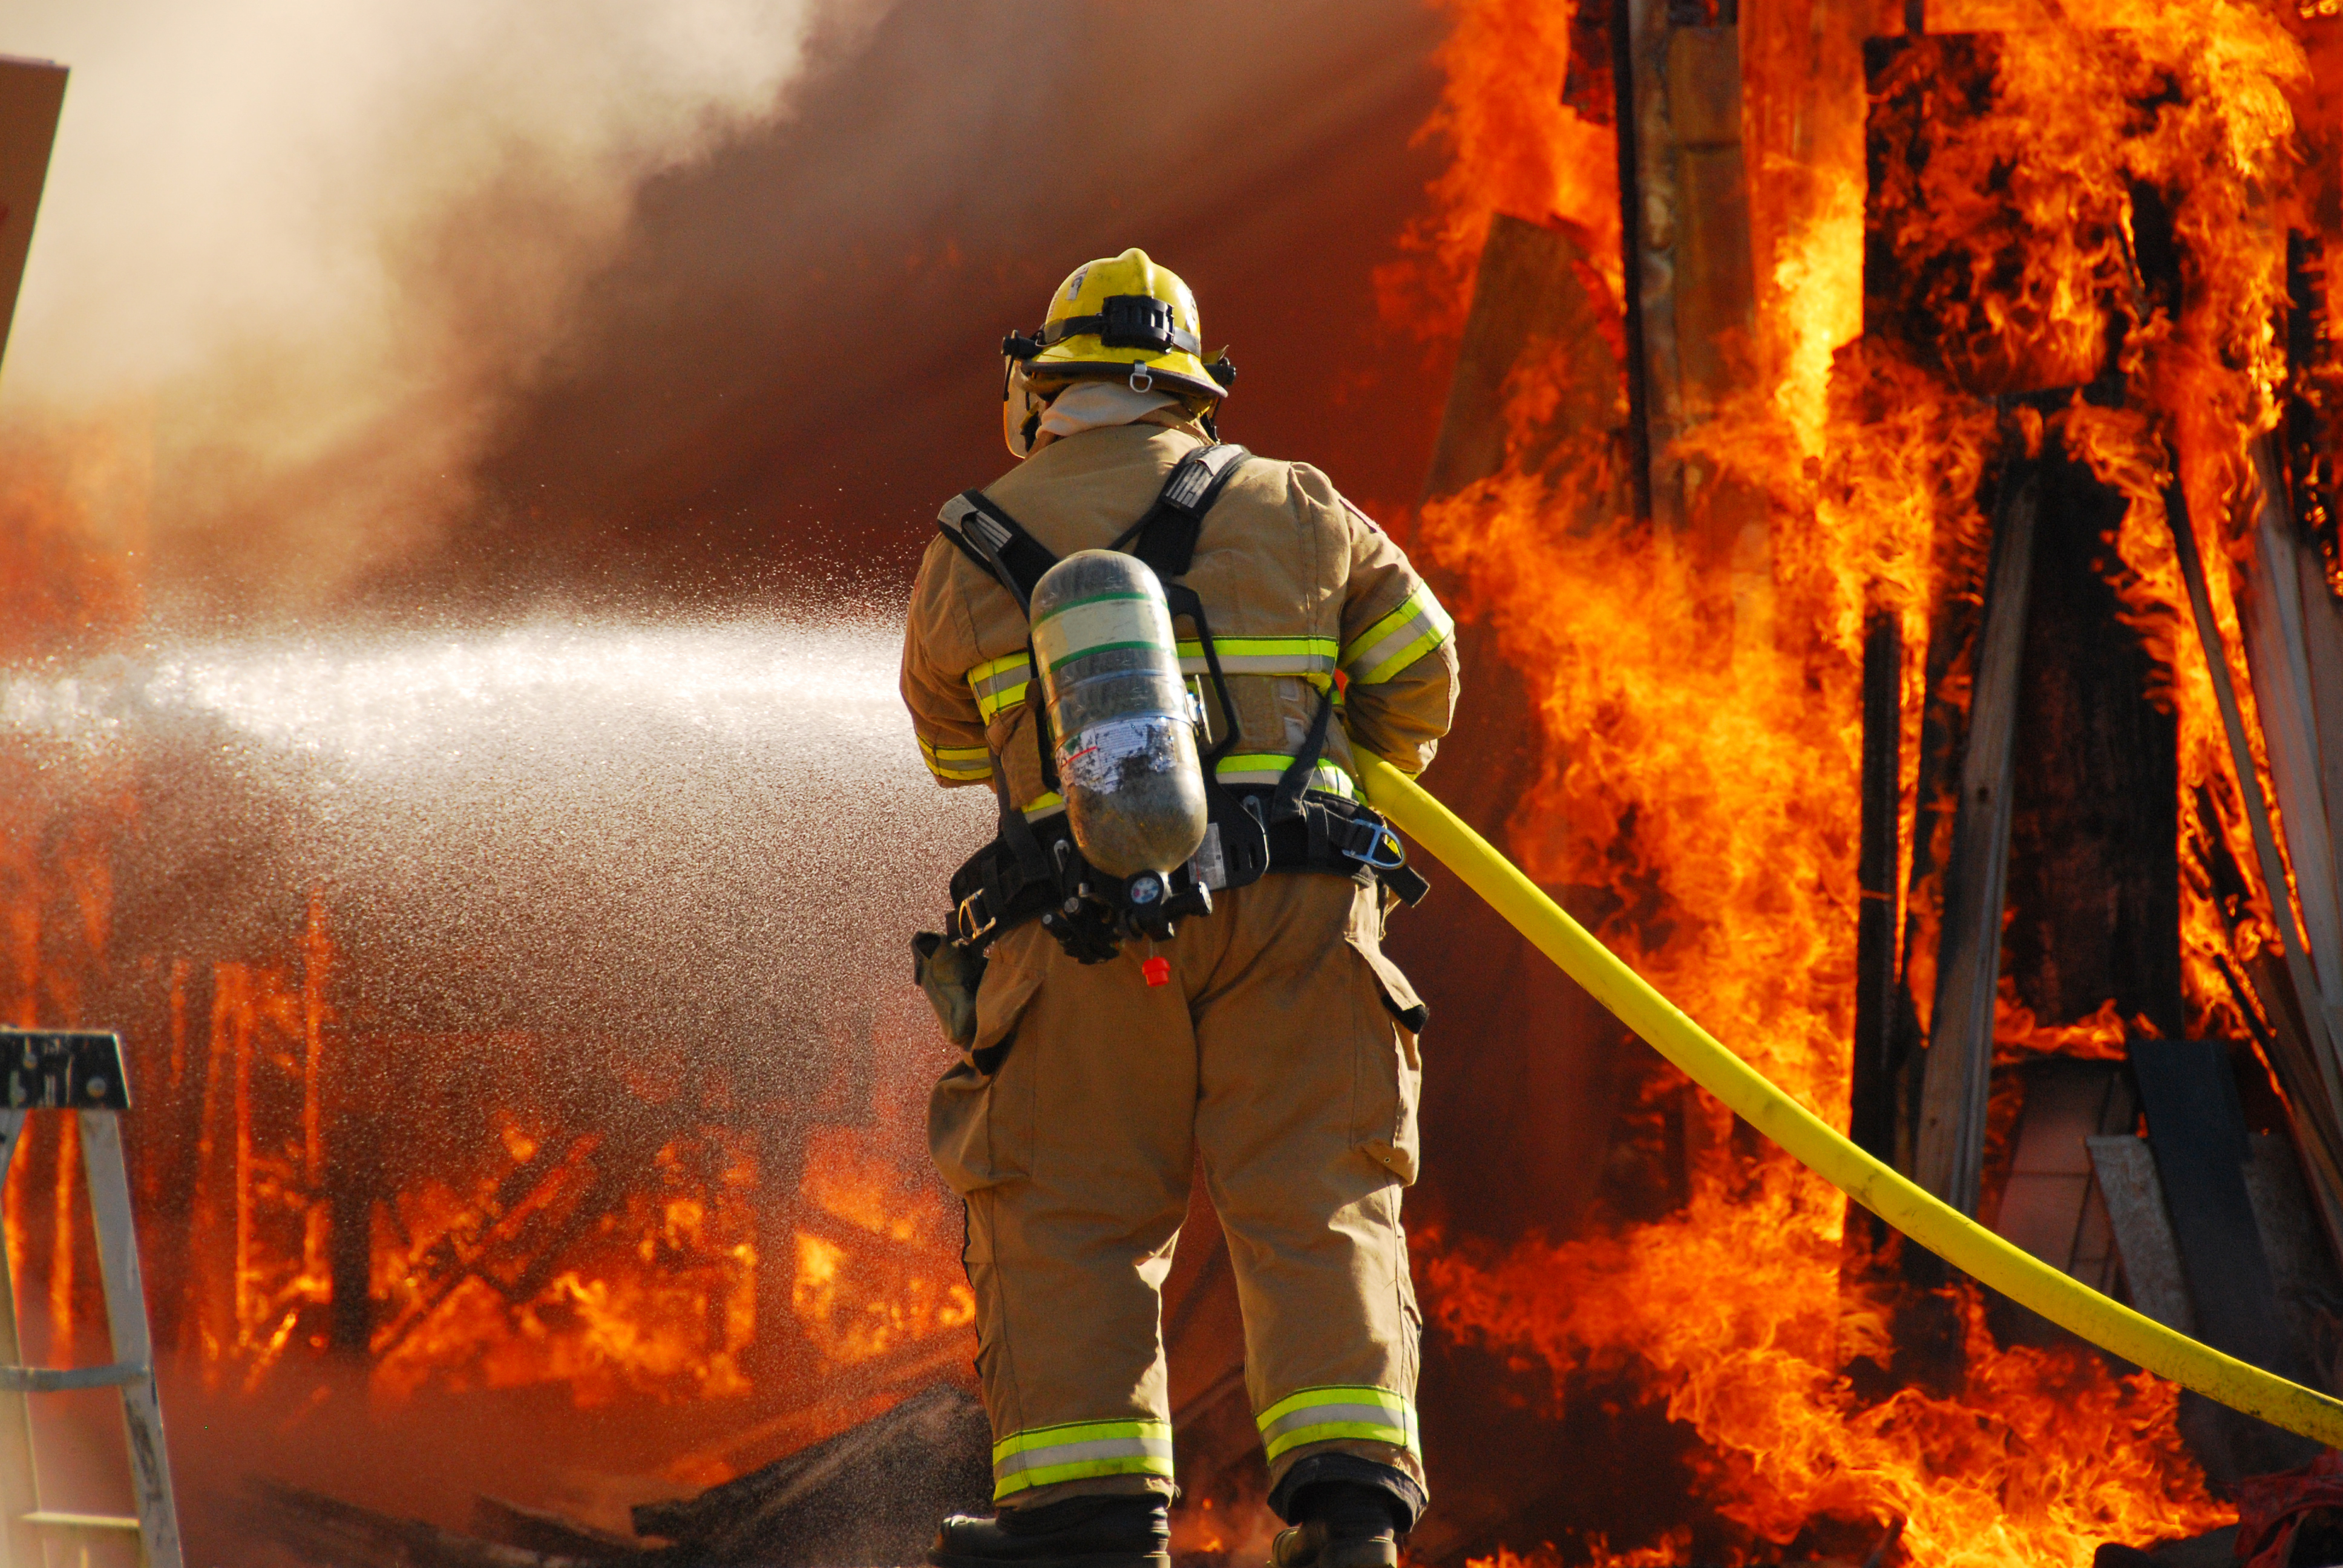 Firefighter infront of a building on fire